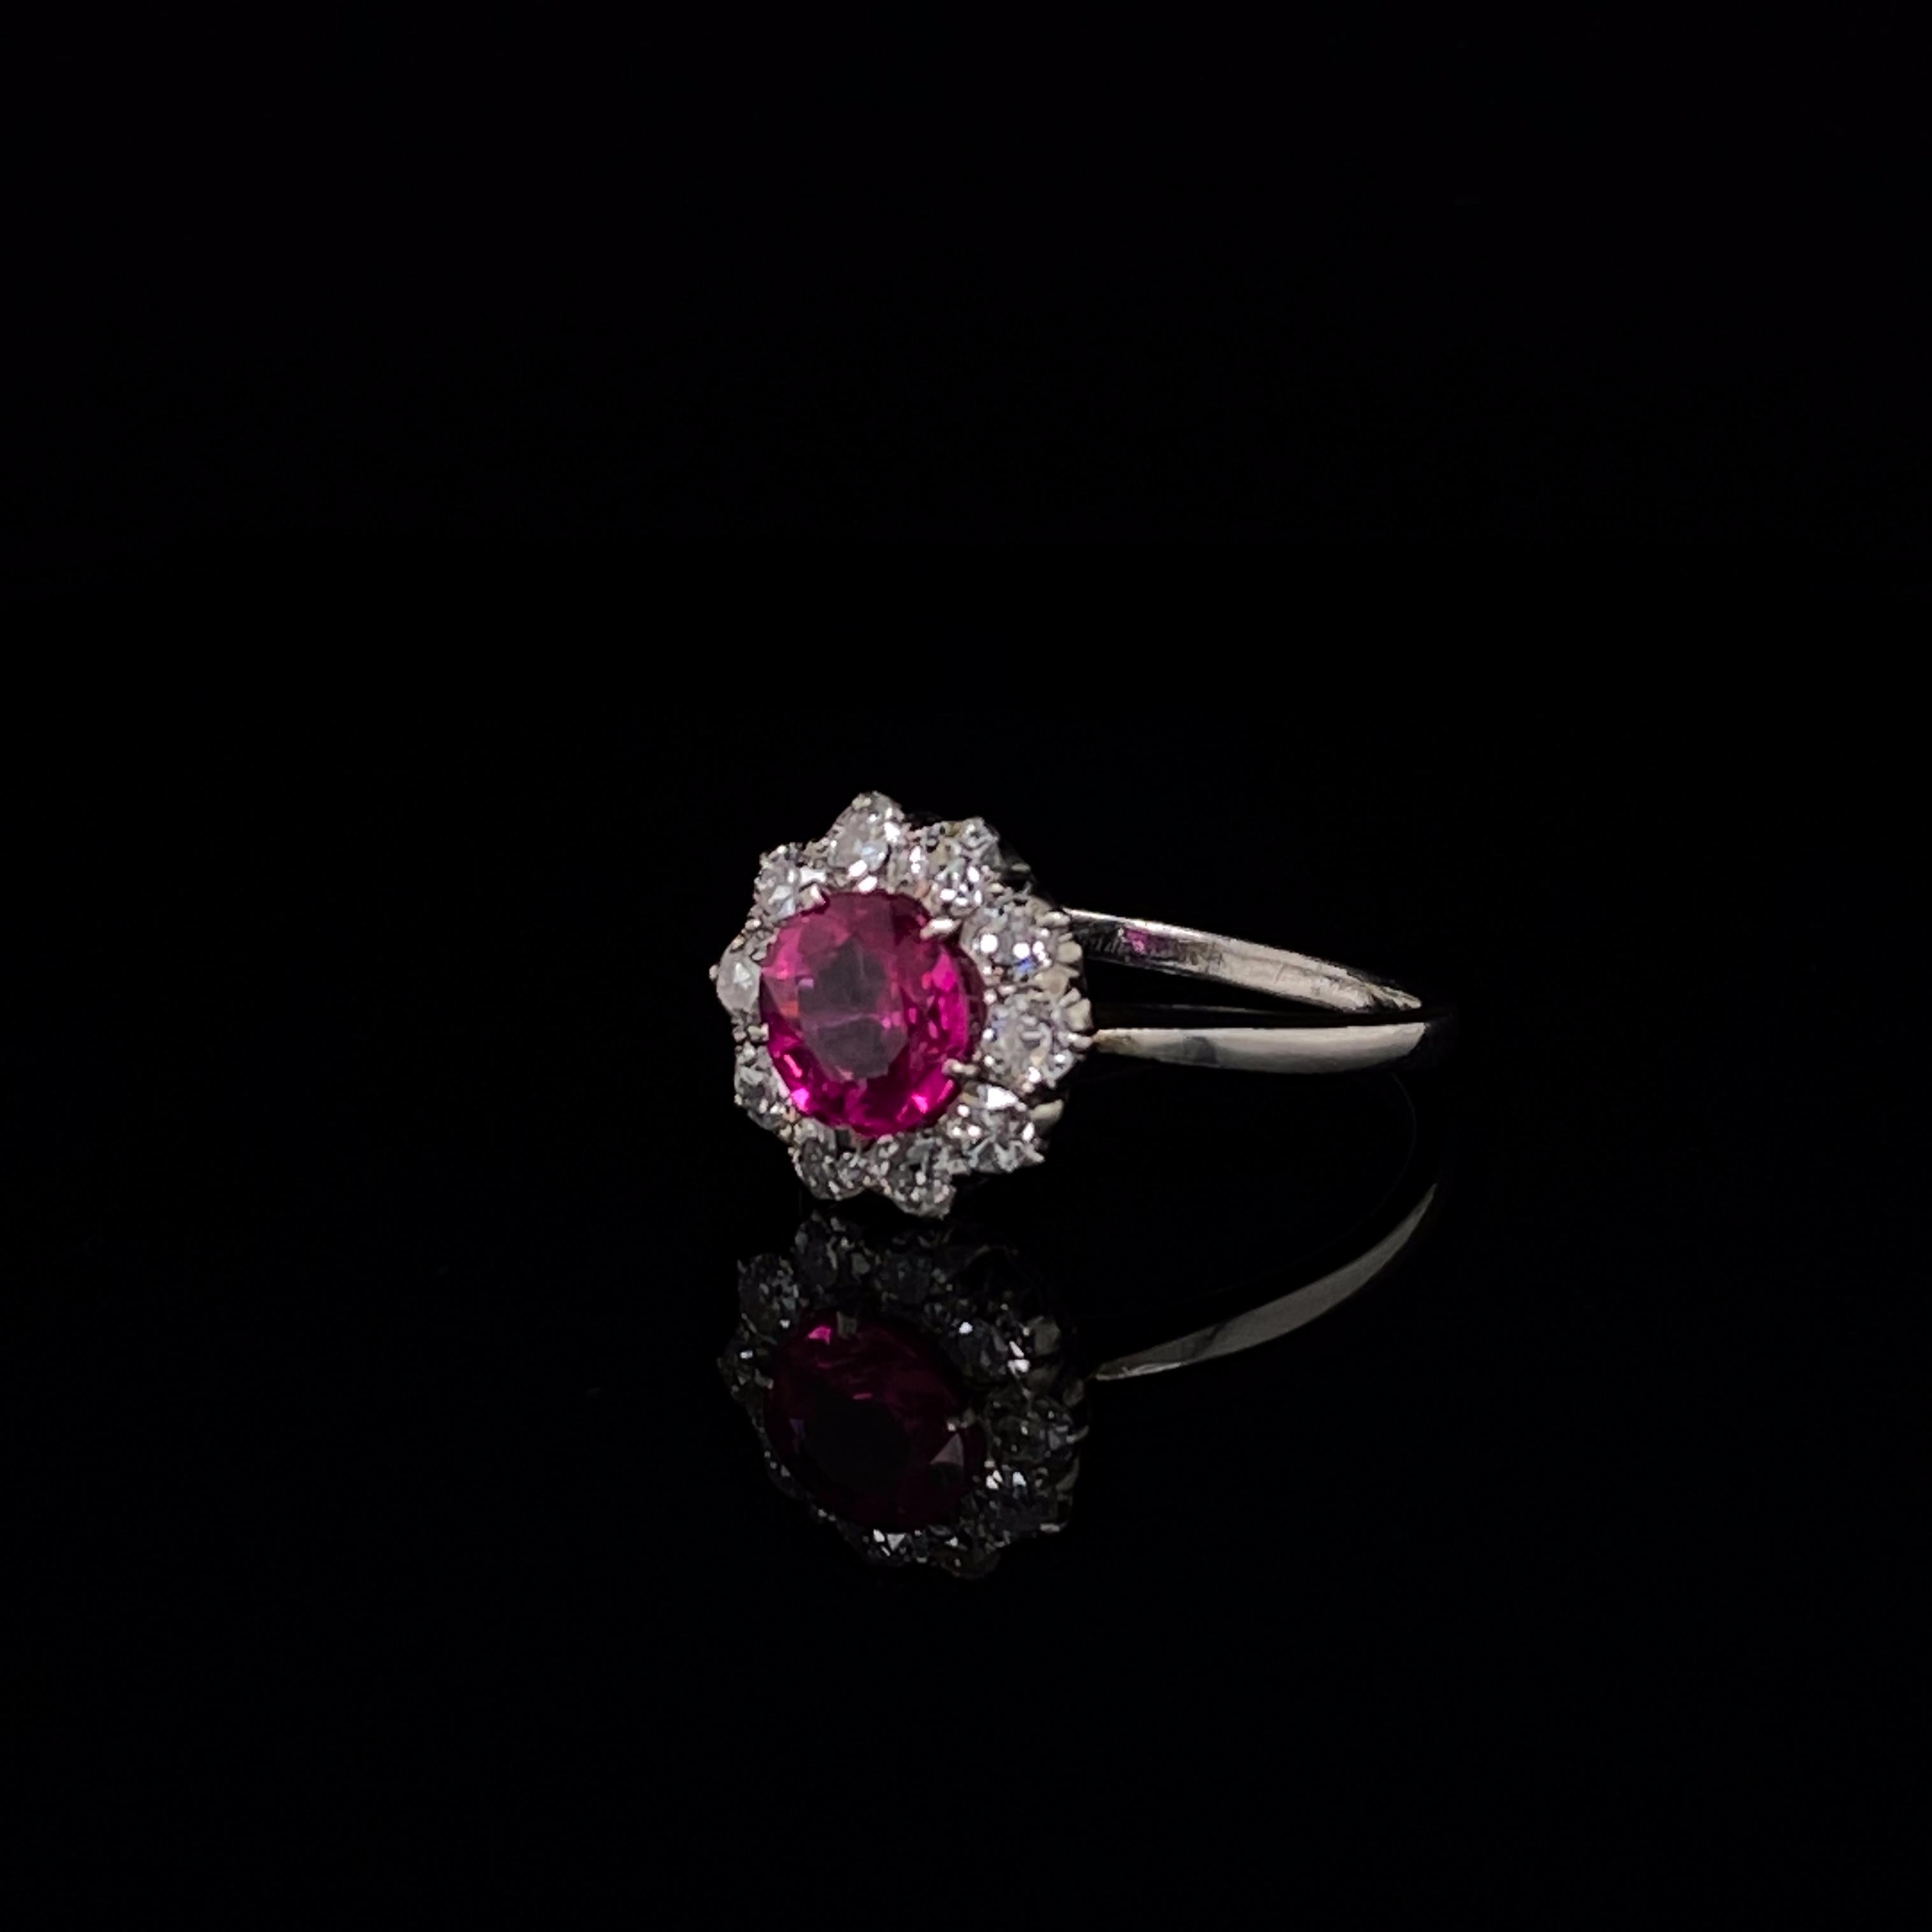 Ruby and diamond 18 karat white gold cluster engagement ring circa 1900.

Such a pretty ring set with a rich, lively ruby centre and old cut diamond surrounds. The 18 karat white gold band tapers towards the ruby and diamond cluster with an open